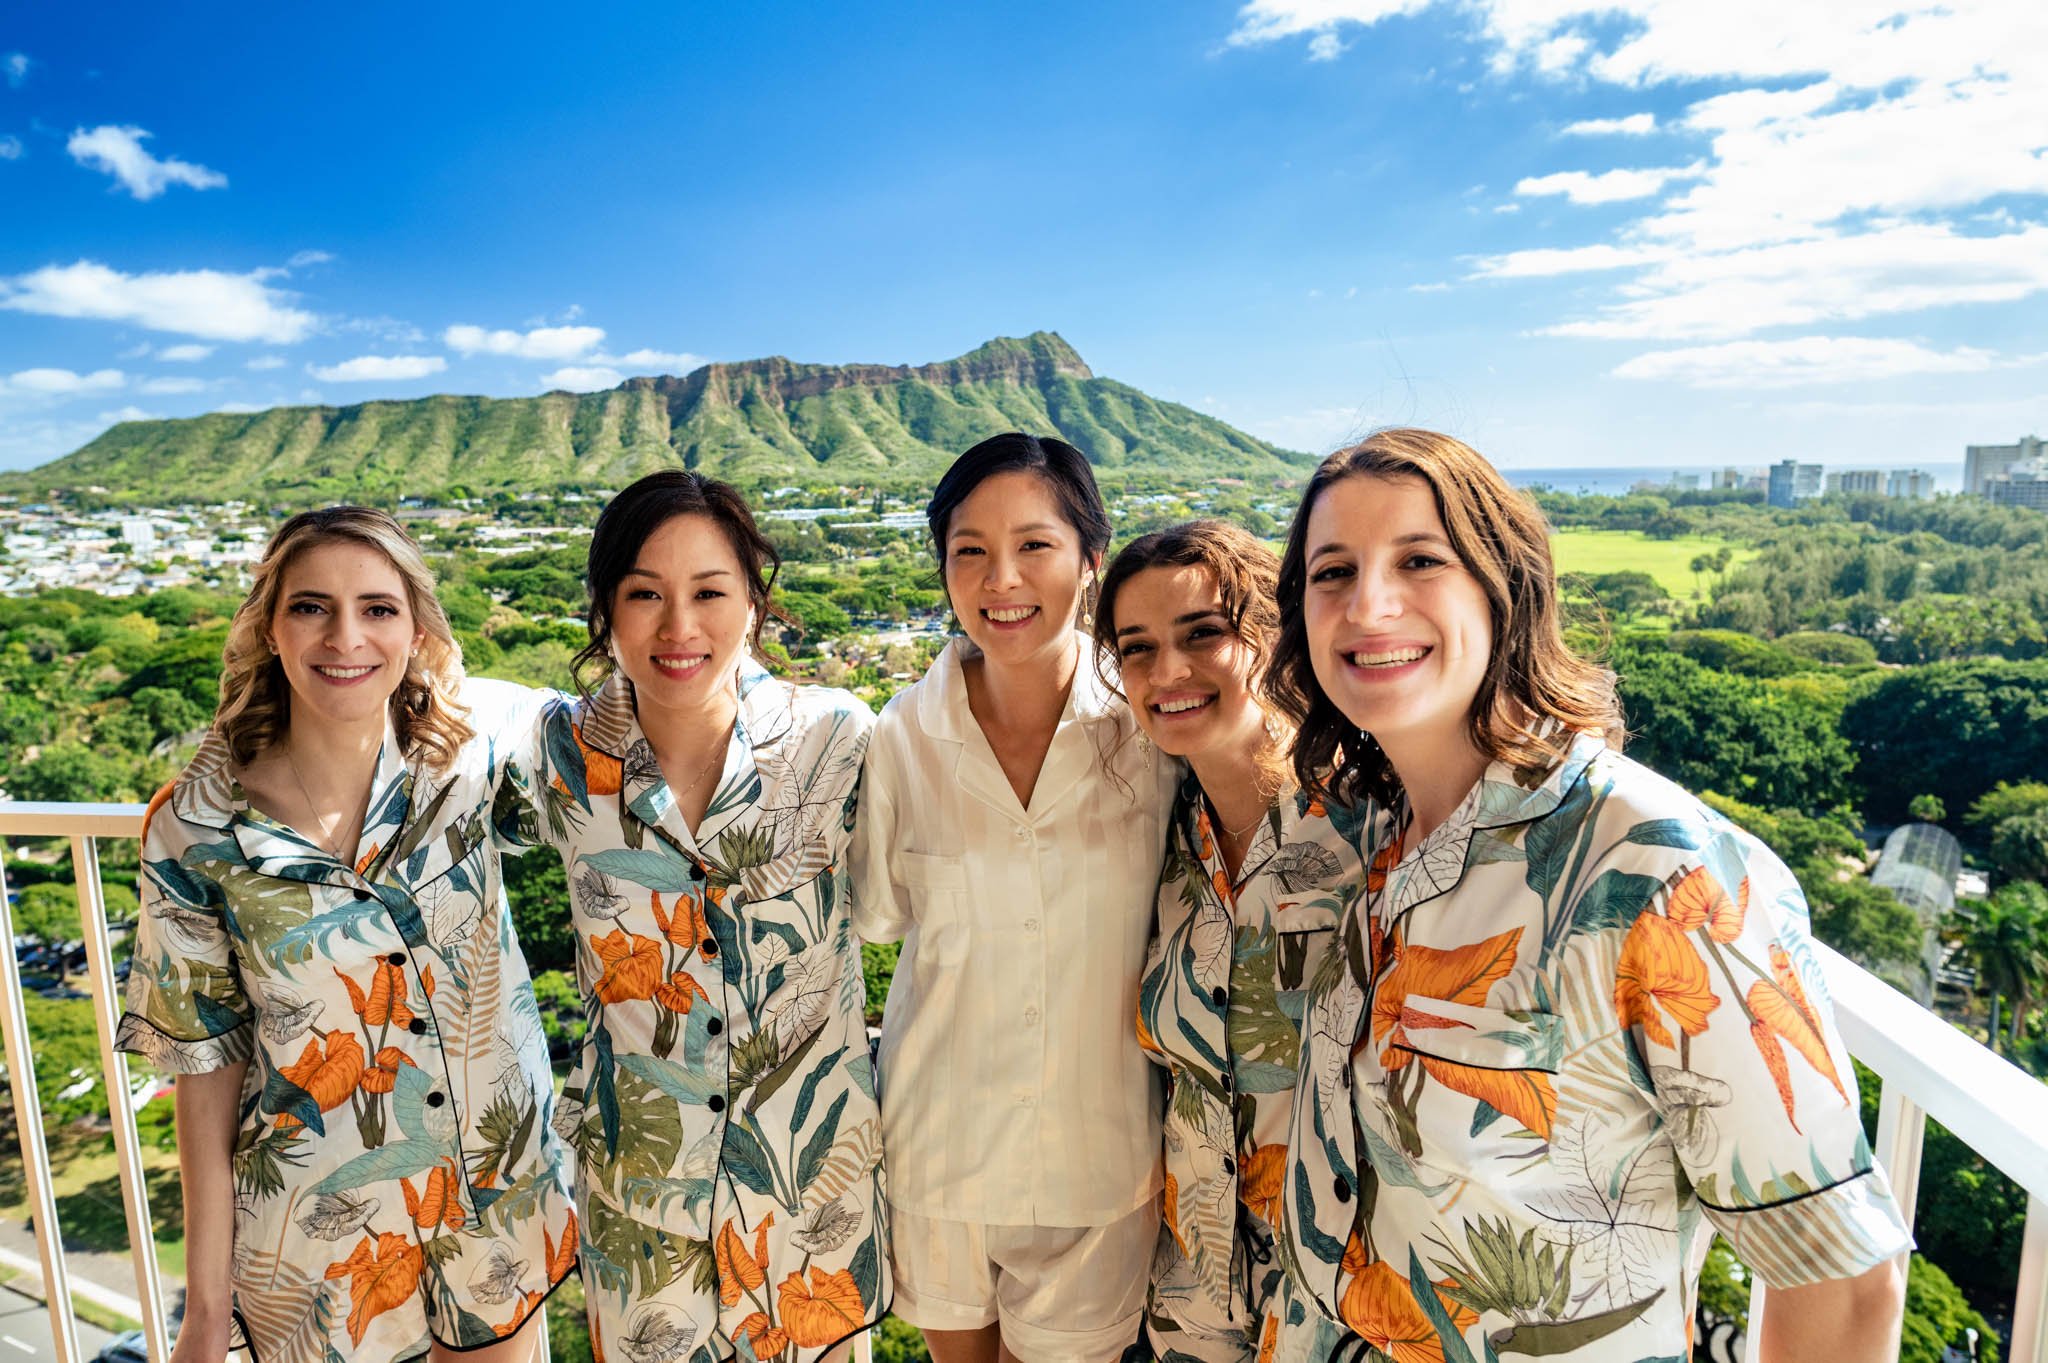 Five women smiling on a balcony with a scenic view of a lush green mountain and cityscape in Honolulu, Hawaii.